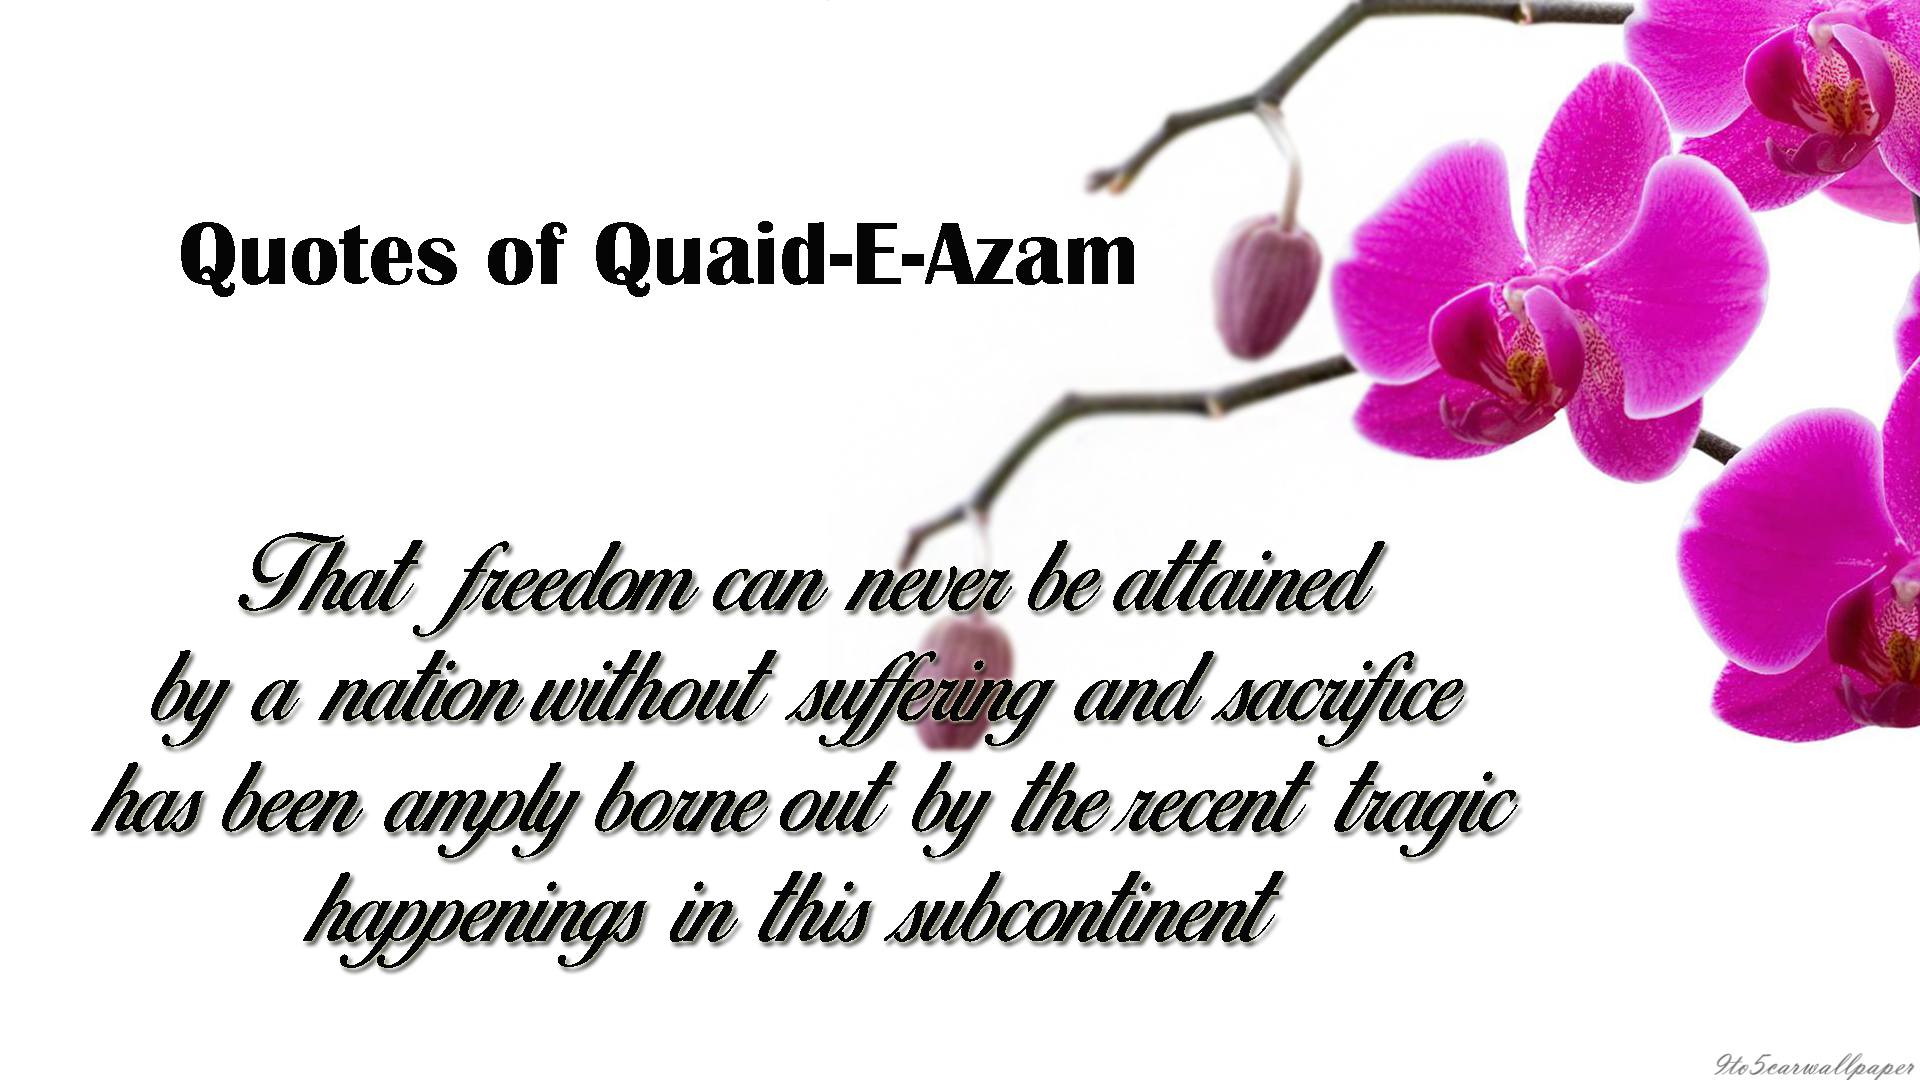 sayings-of-quaid-e-Azam-images-quotes-wallpapers-posters-cards